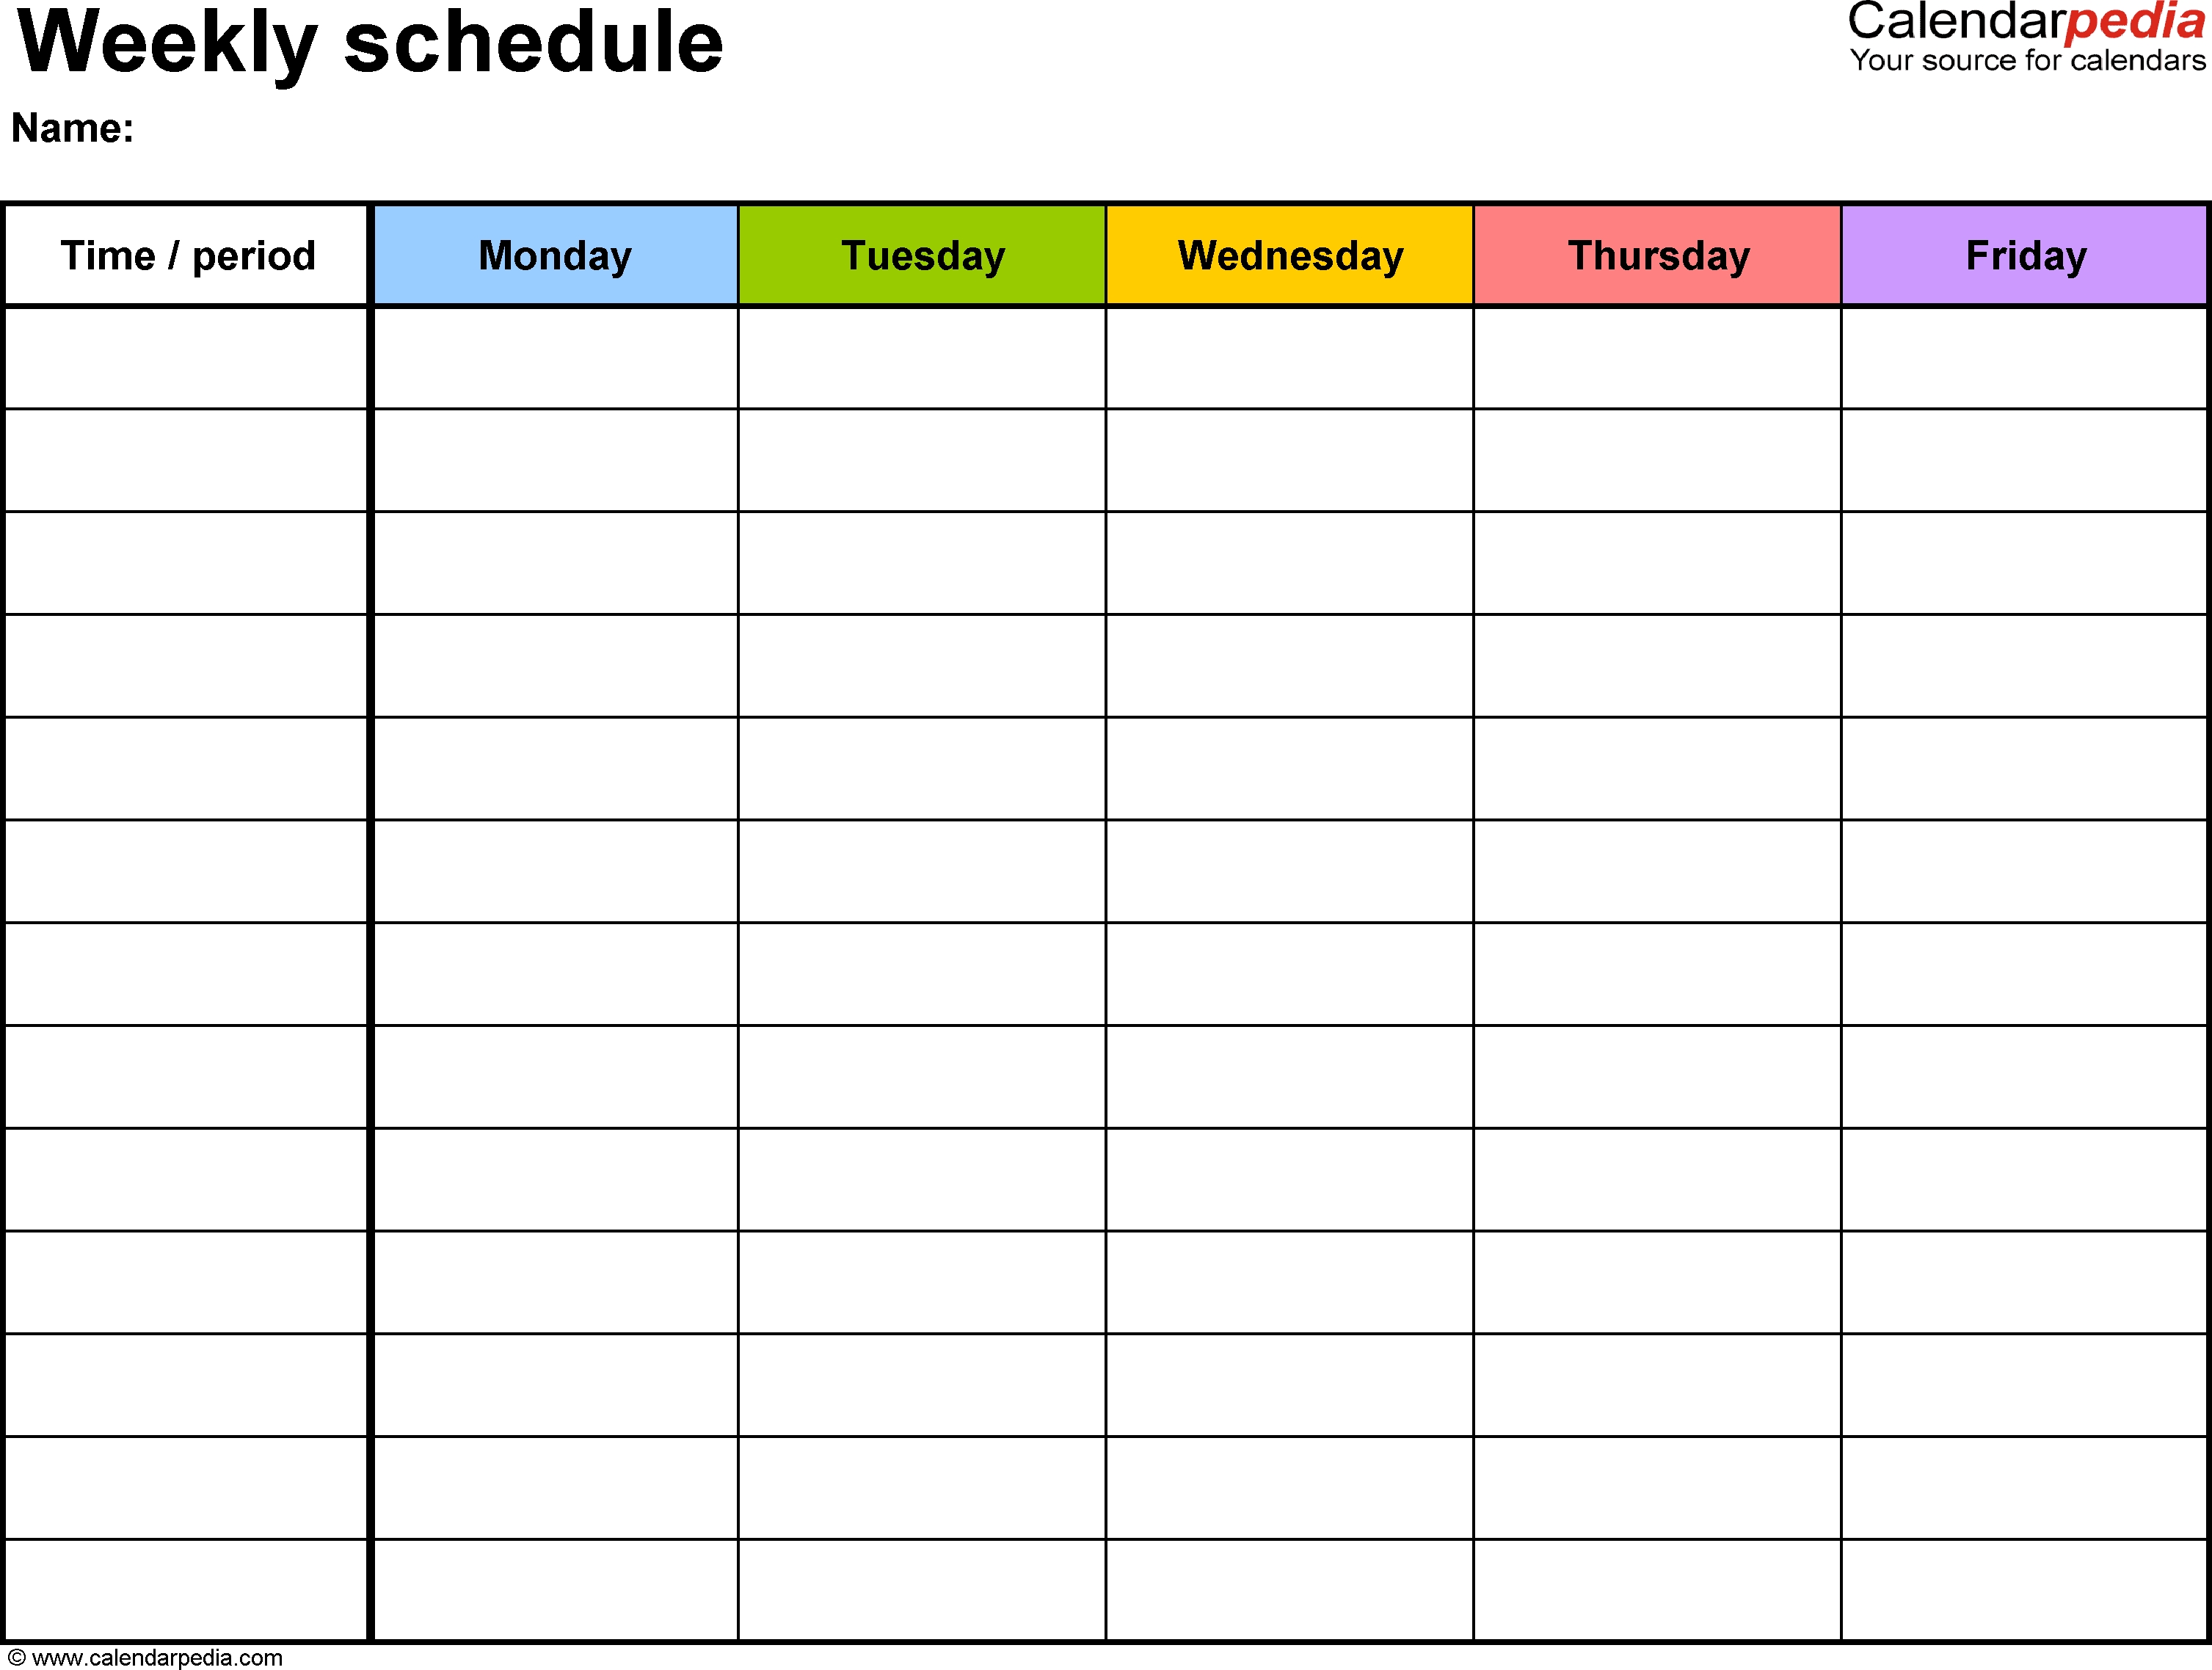 Free Weekly Schedule Templates For Excel - 18 Templates  6 Weeks Holiday Timeline Template